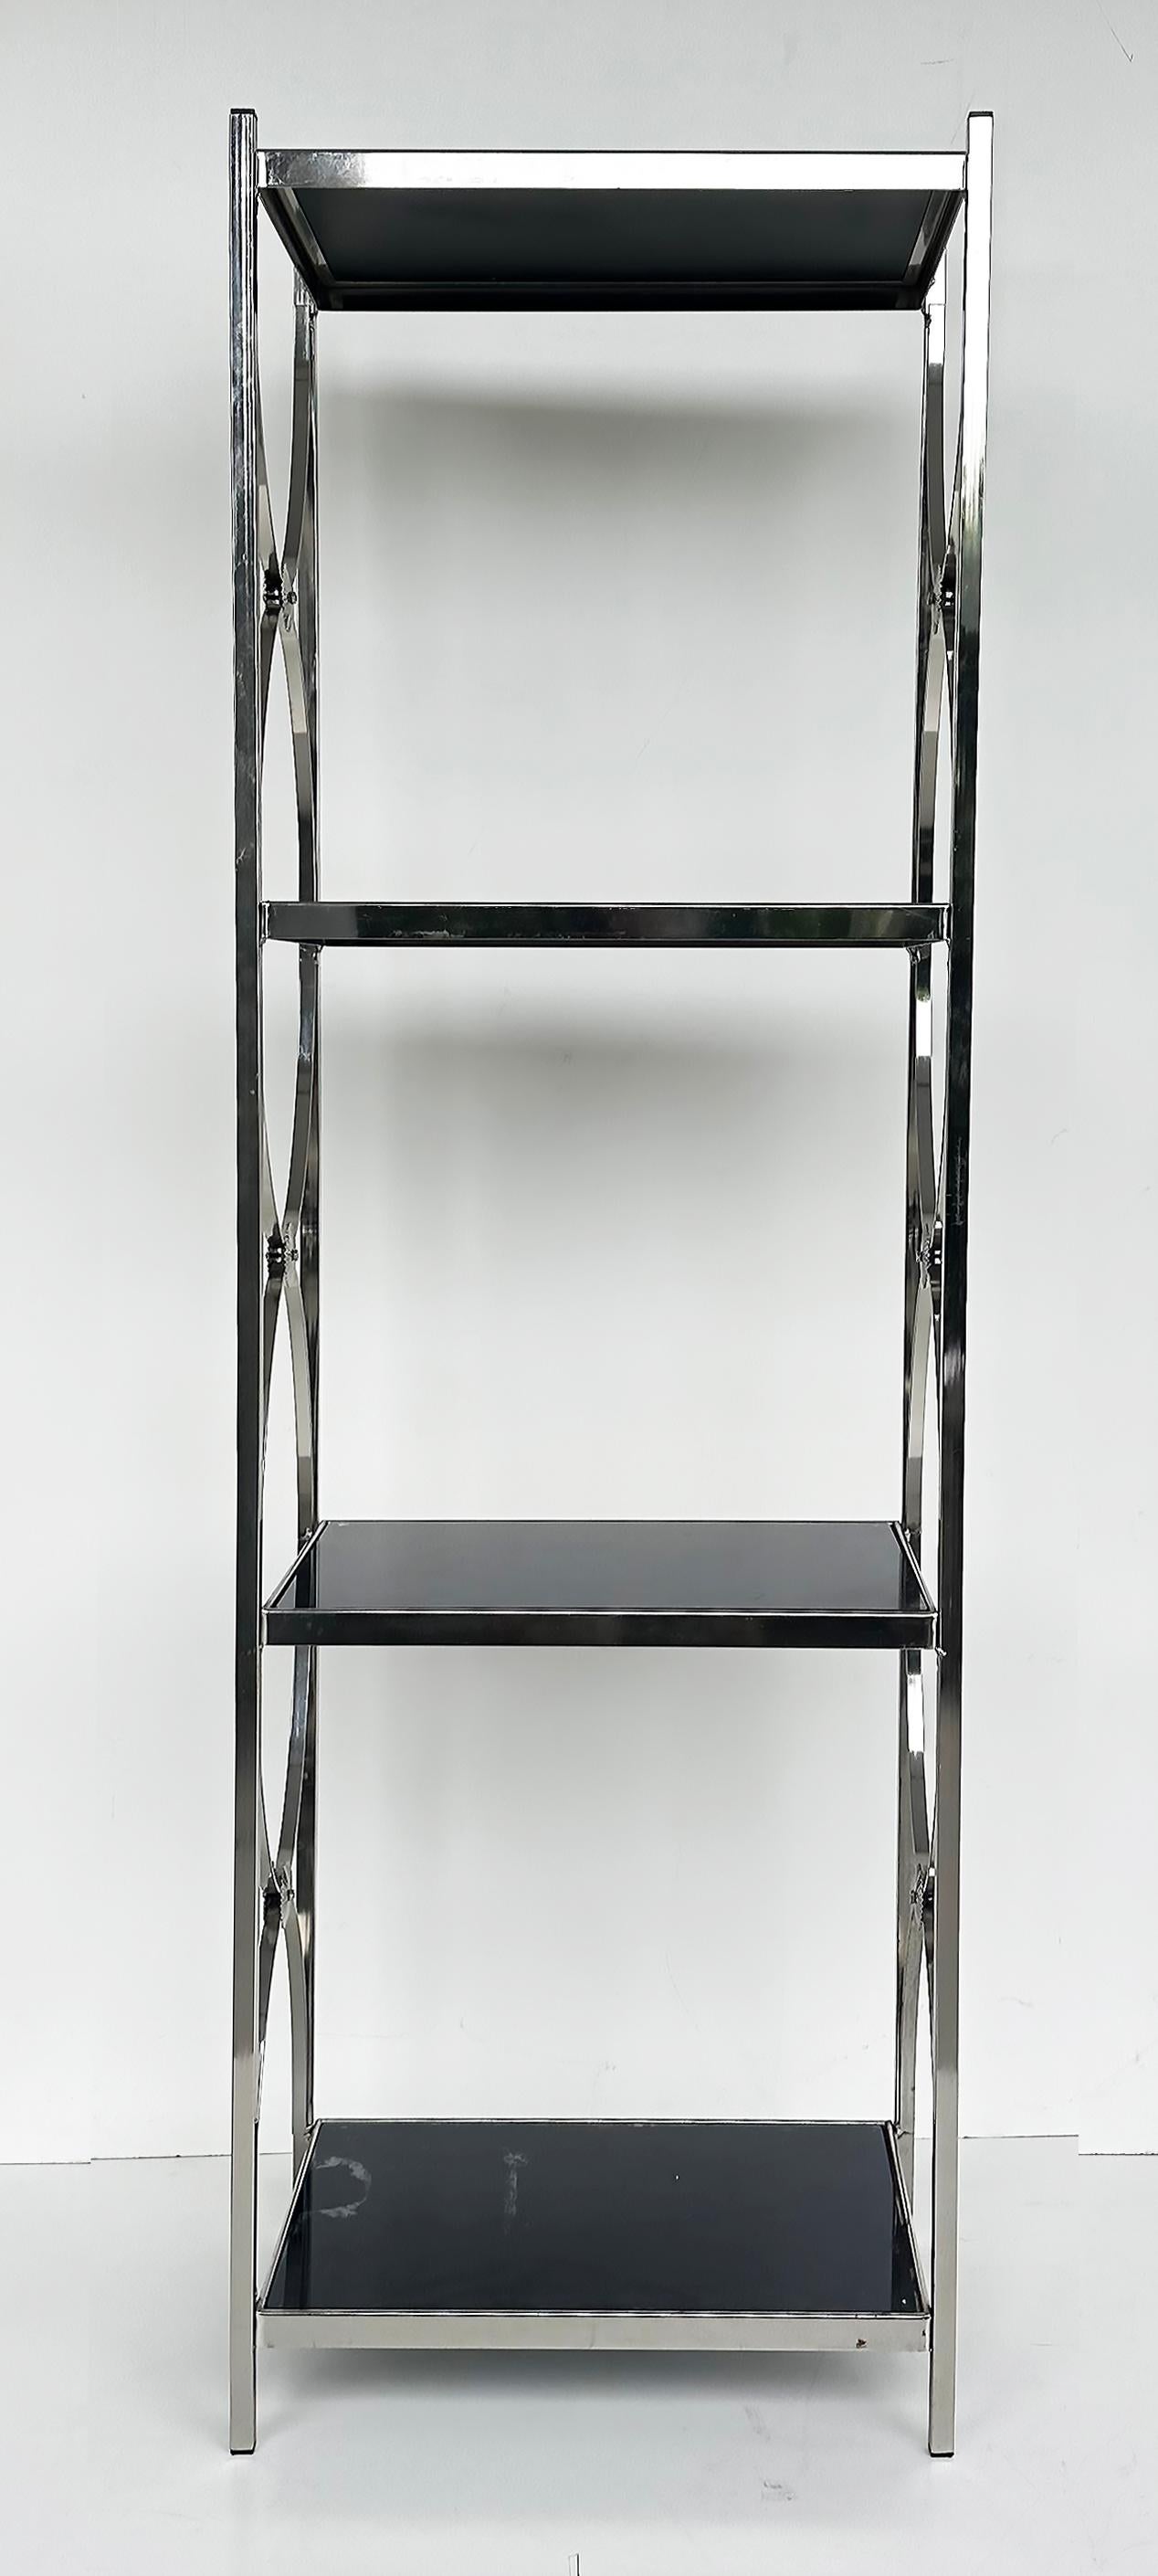 Vintage Chrome 3-Tiered Black Glass Shelves Etagere, A Pair

Offered for sale is a pair of late 20th-century vintage chrome framed etageres with glass shelves. The chrome curves and is met with rosettes on the sides. The etageres are 3-tiered and